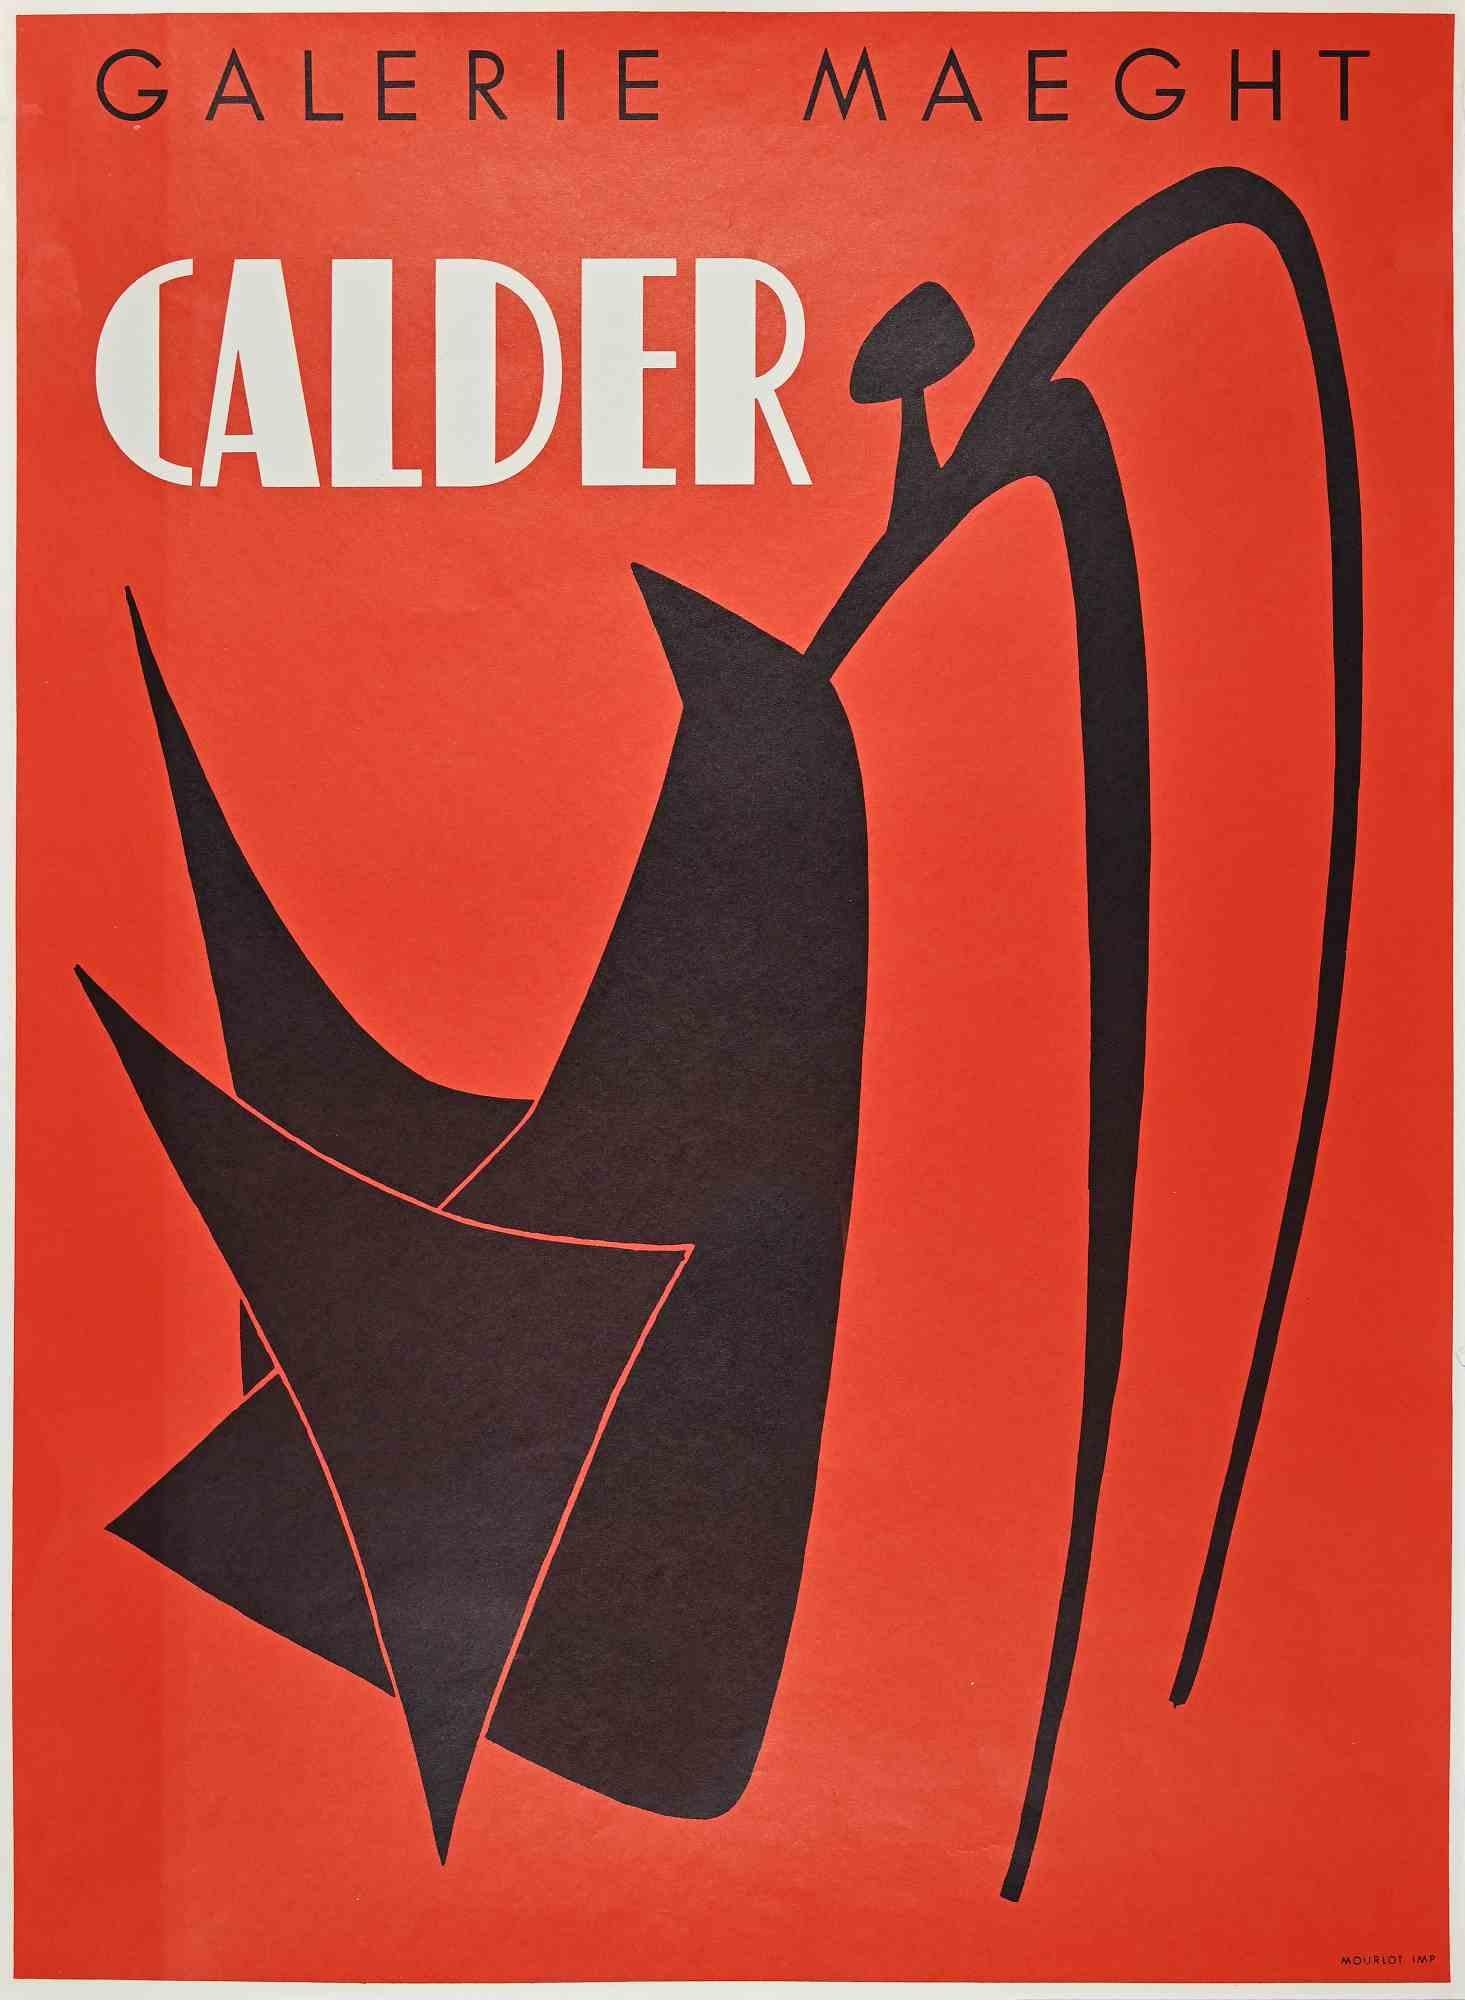 Calder in red is vintage poster realized after Alexander Calder in the 1970s.

Colour lithograph on paper. Not signed

Published by Galerie Maeght, Paris.

Good conditions except for right margin tiny marginal print spot 

The artwork is the